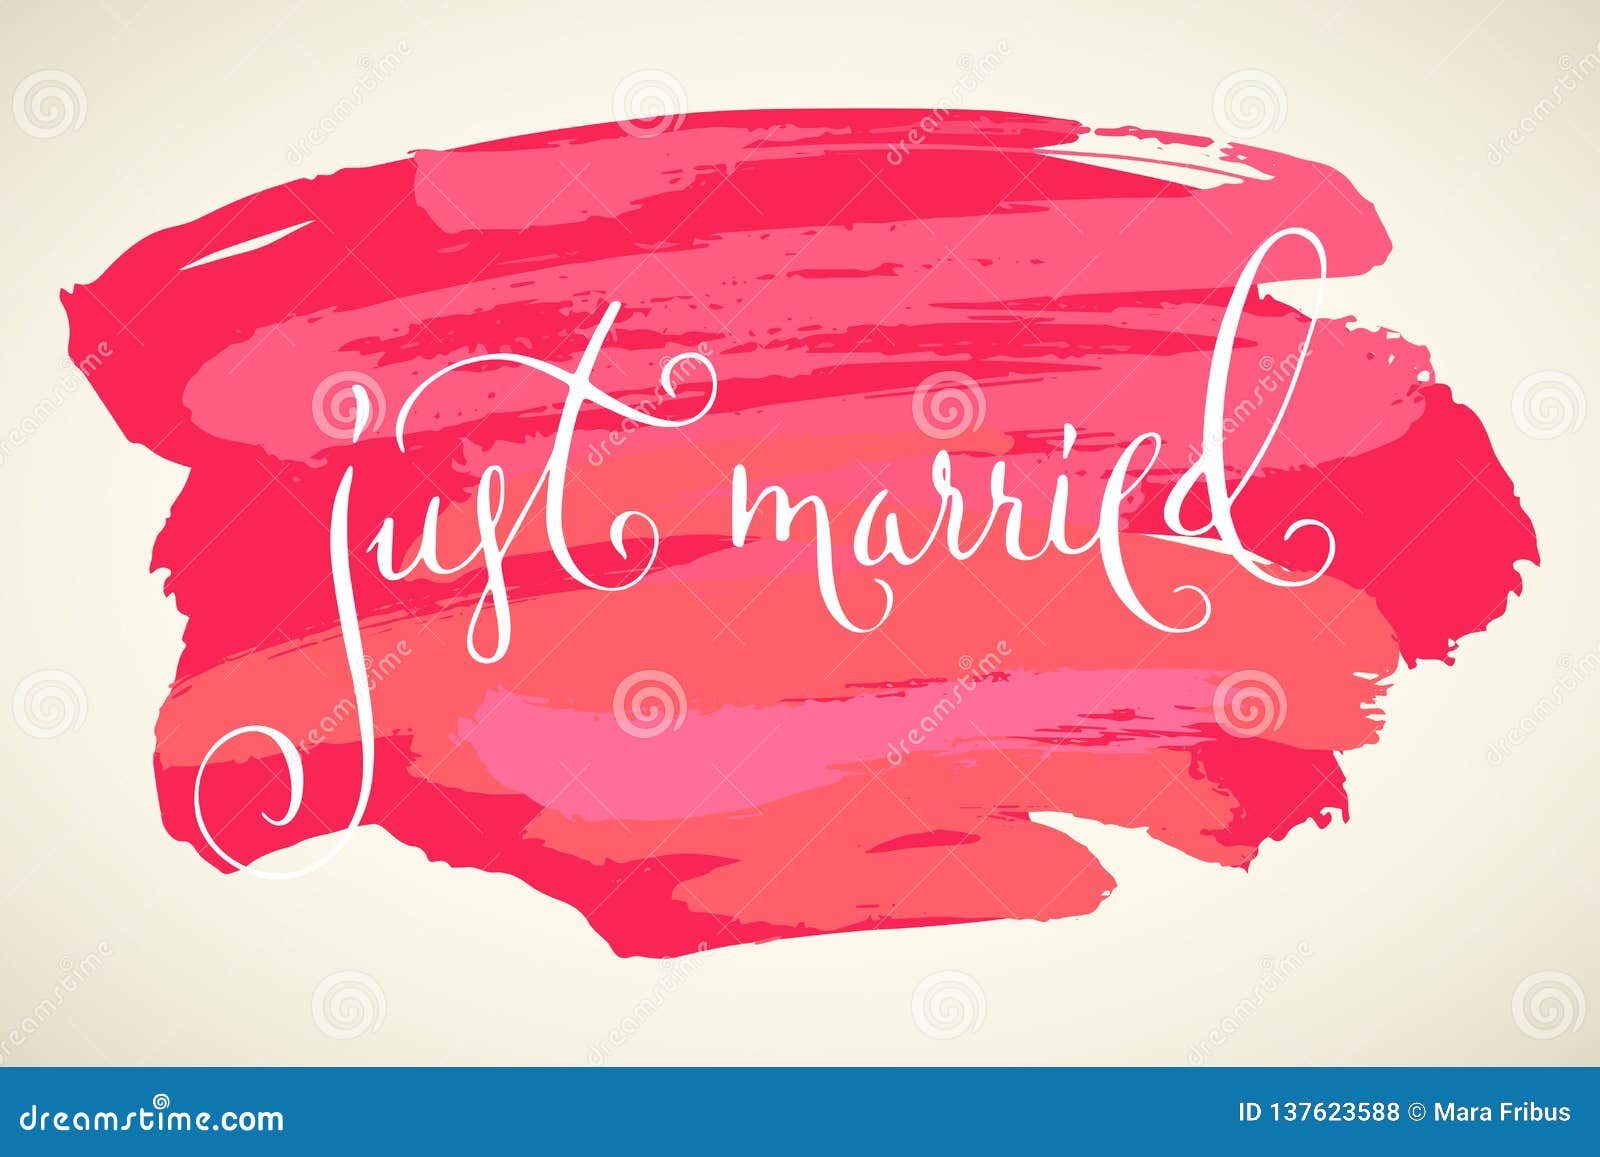 just married wedding modern calligraphy